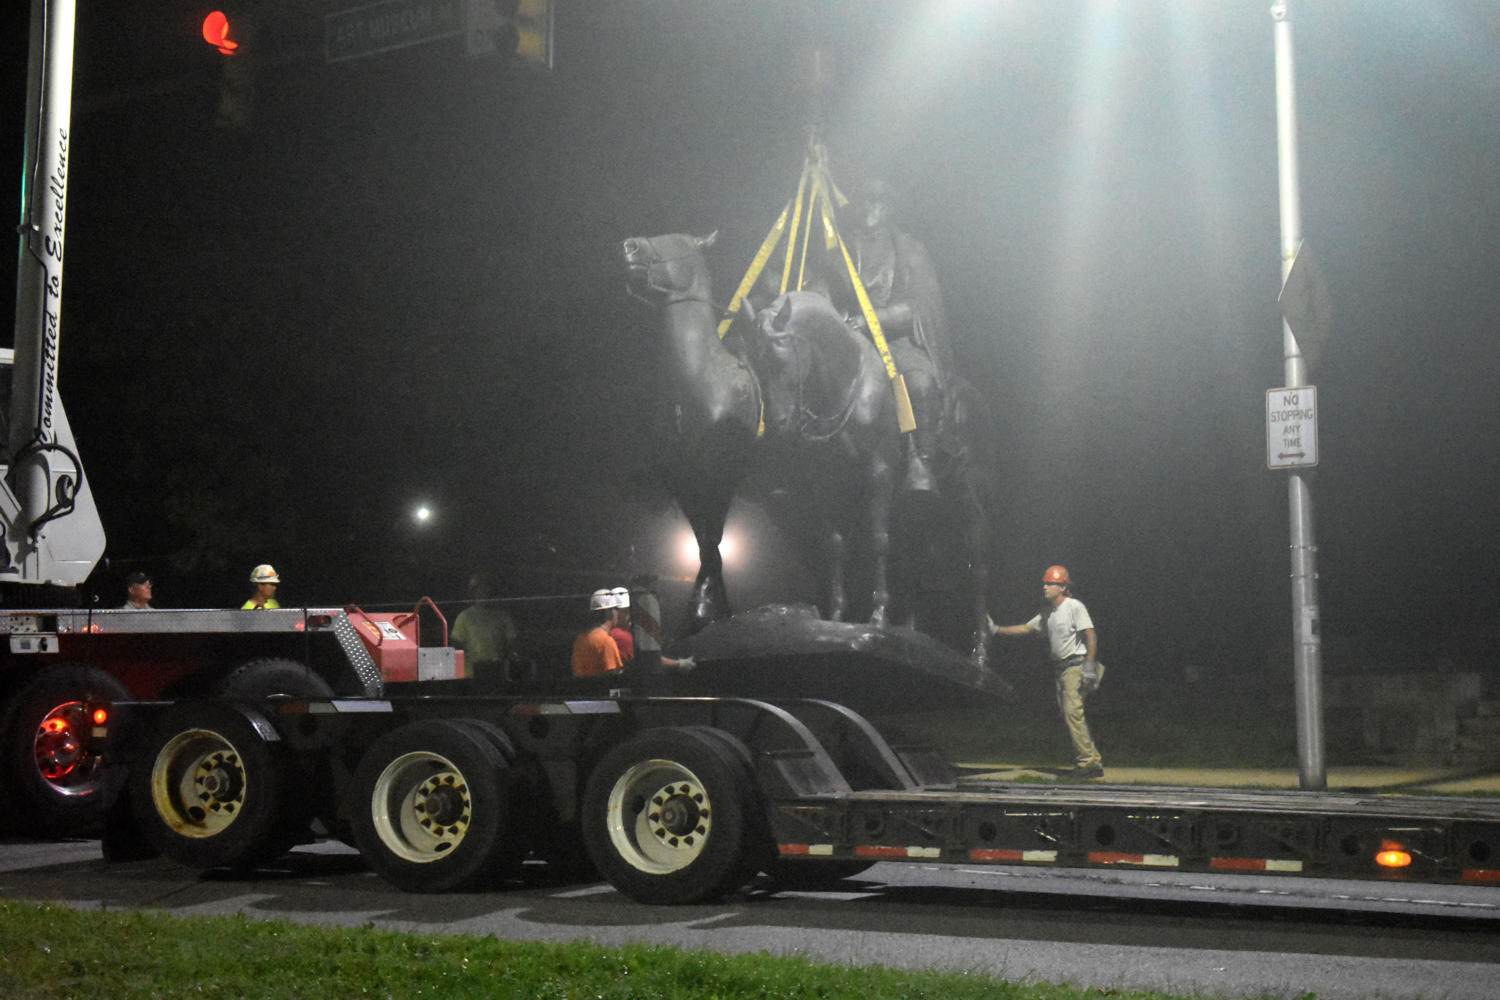 The Jackson-Lee Monument in Wyman Park is removed on Aug. 16, 2017 in Baltimore, Md. (Denise Sanders/ Baltimore Sun/TNS)